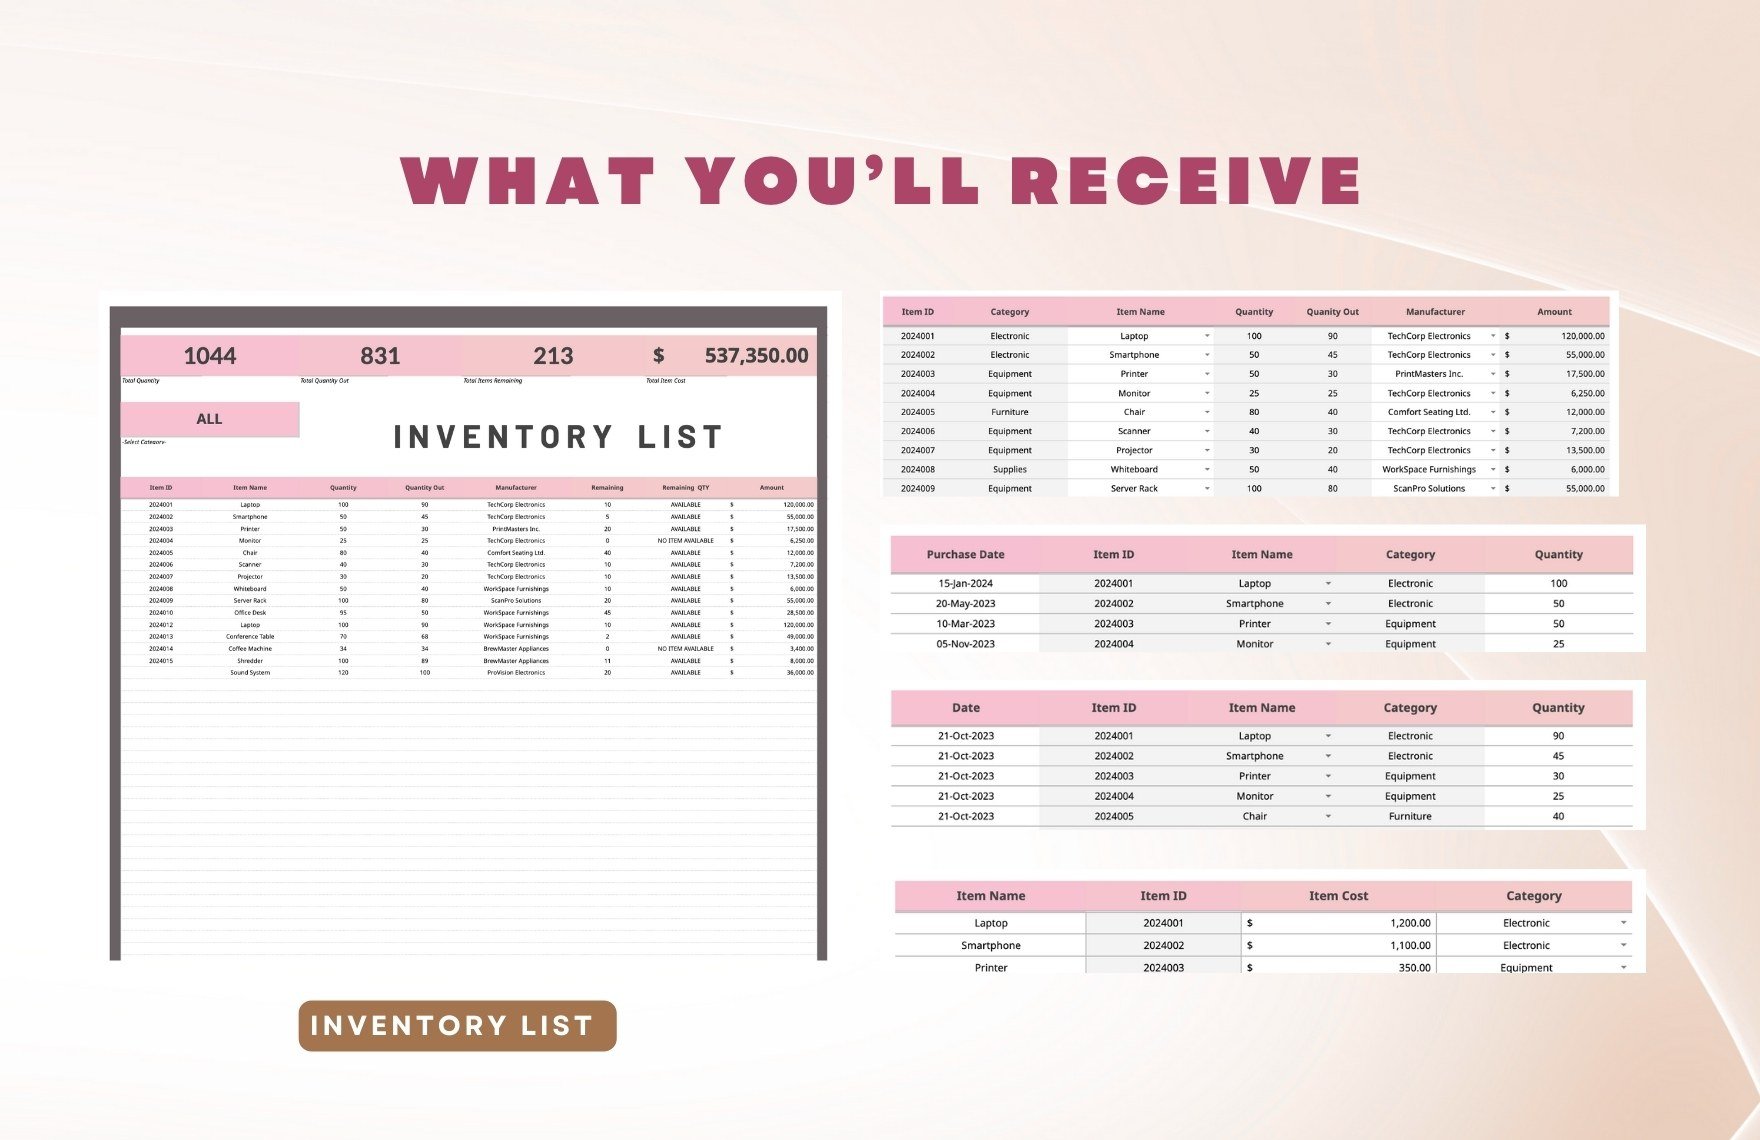 Inventory List Template